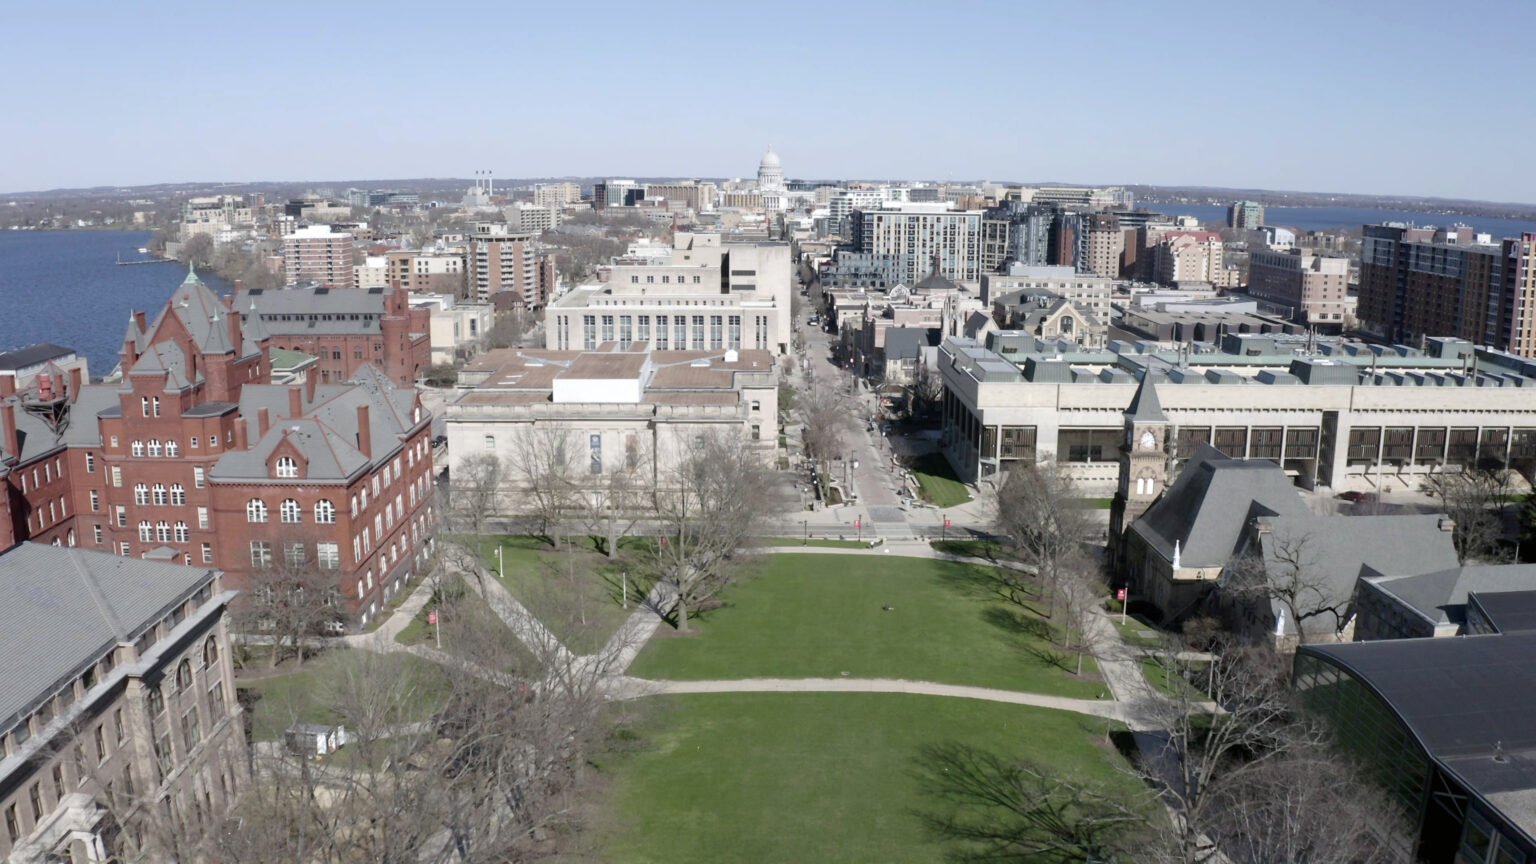 An aerial photo shows areas of grassy lawn at the bottom of a hill, with masonry and concrete buildings on either side, with a cityscape of various buildings, the dome of the Wisconsin State Capitol and portions of two lakes visible in the background.